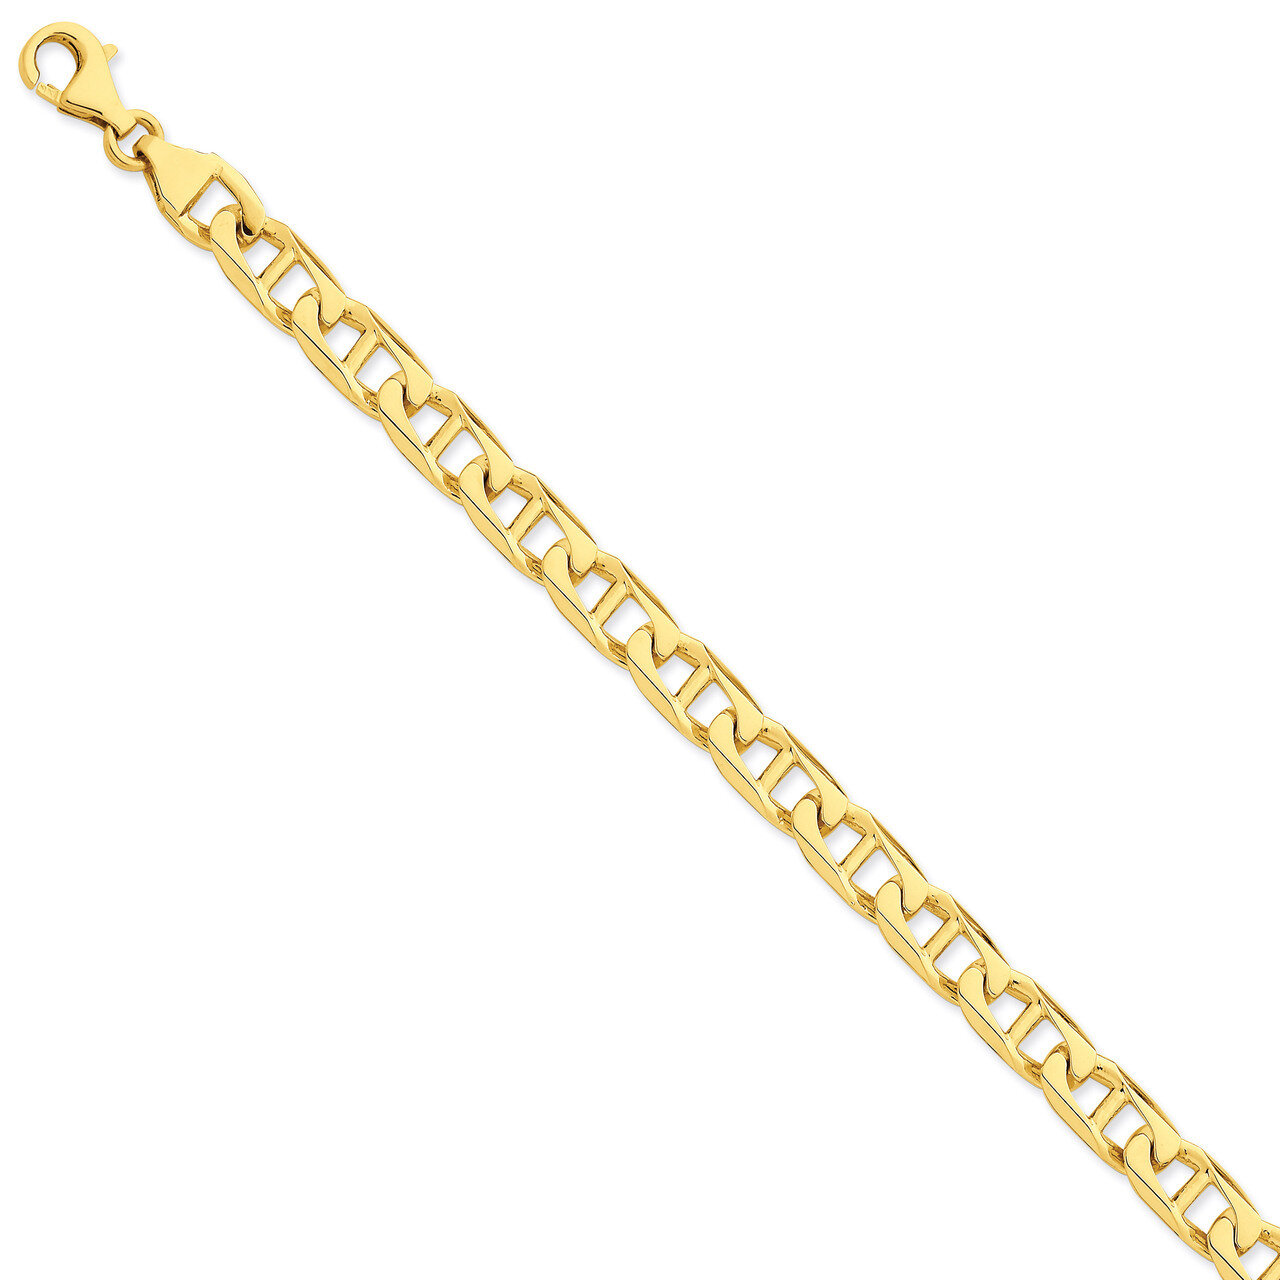 9mm Hand-polished Anchor Link Chain 20 Inch 14k Gold LK101-20